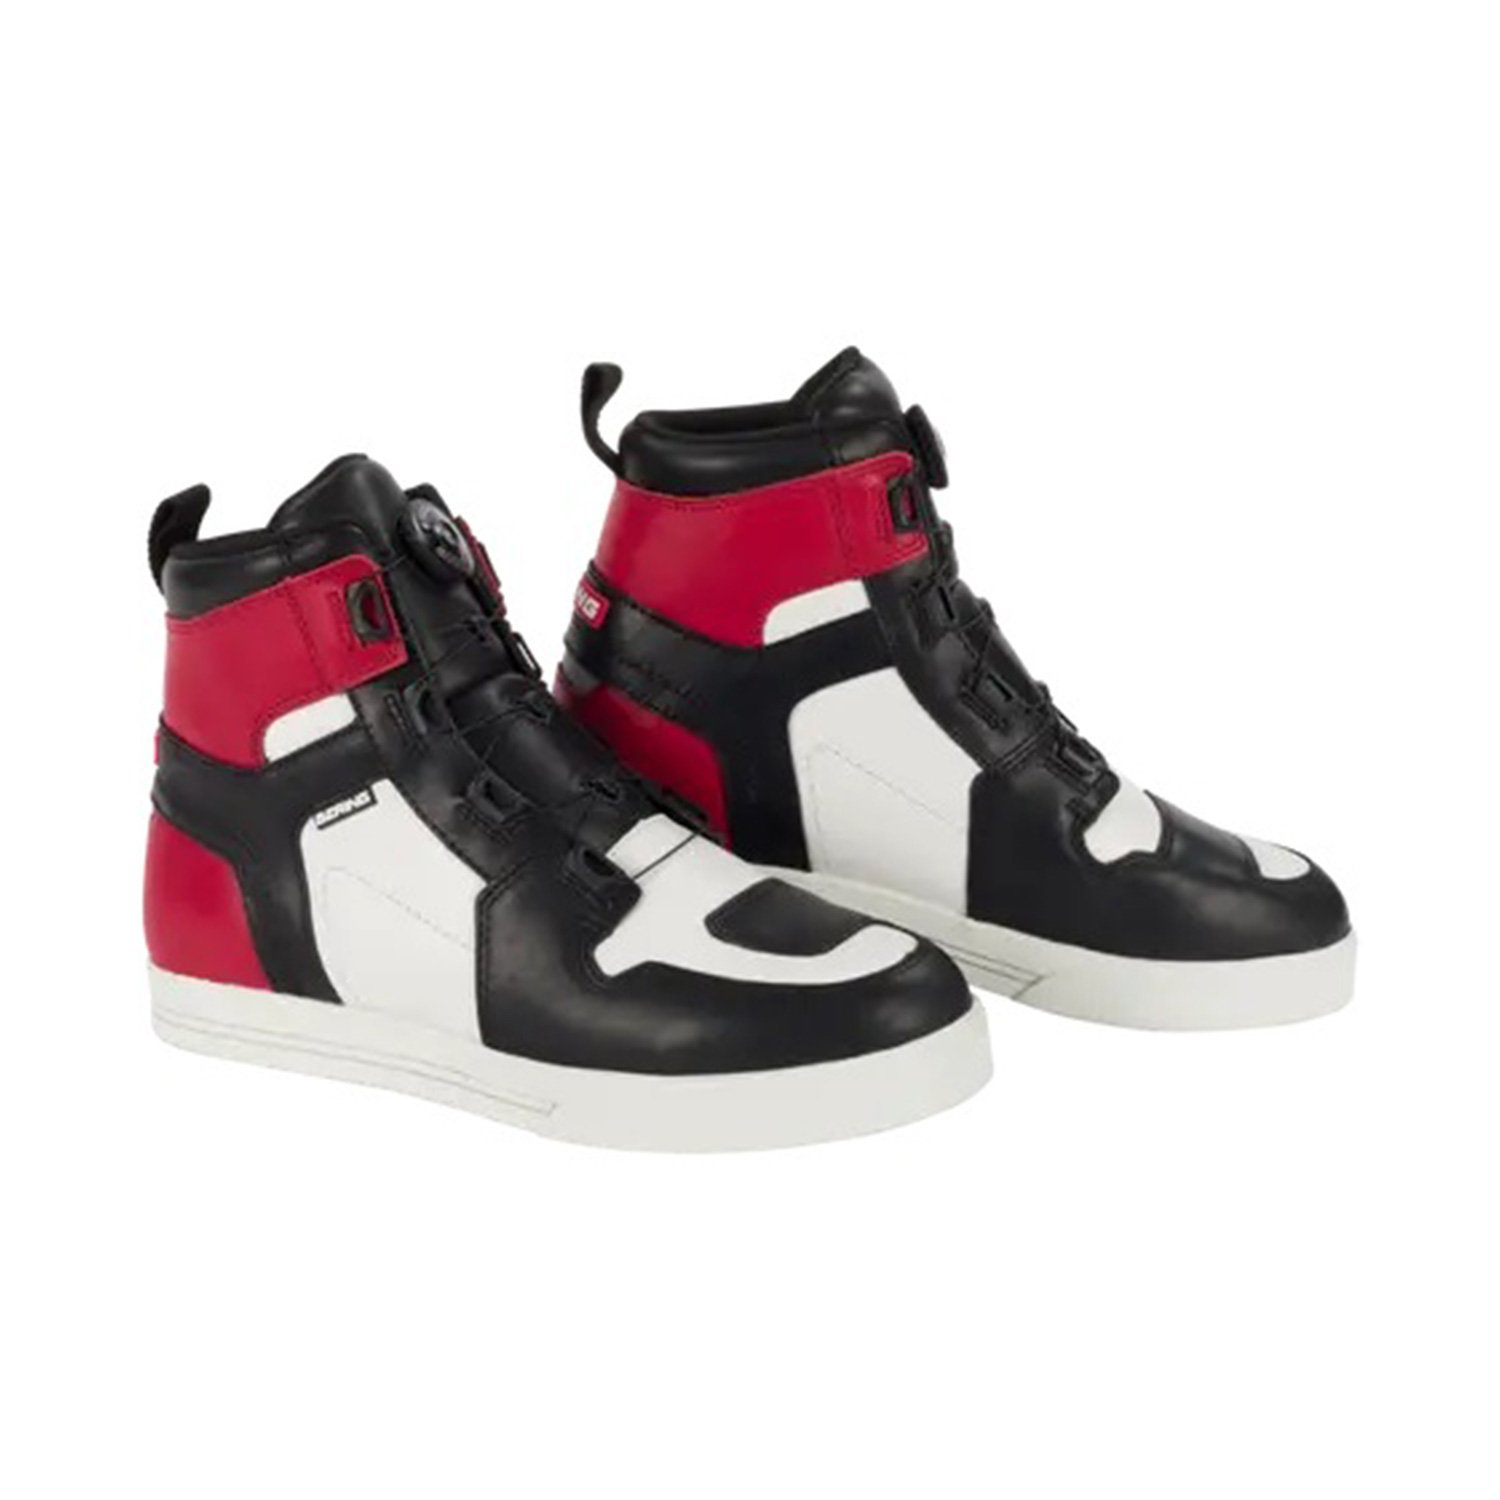 Image of Bering Sneakers Reflex A-Top Black White Red Talla 40